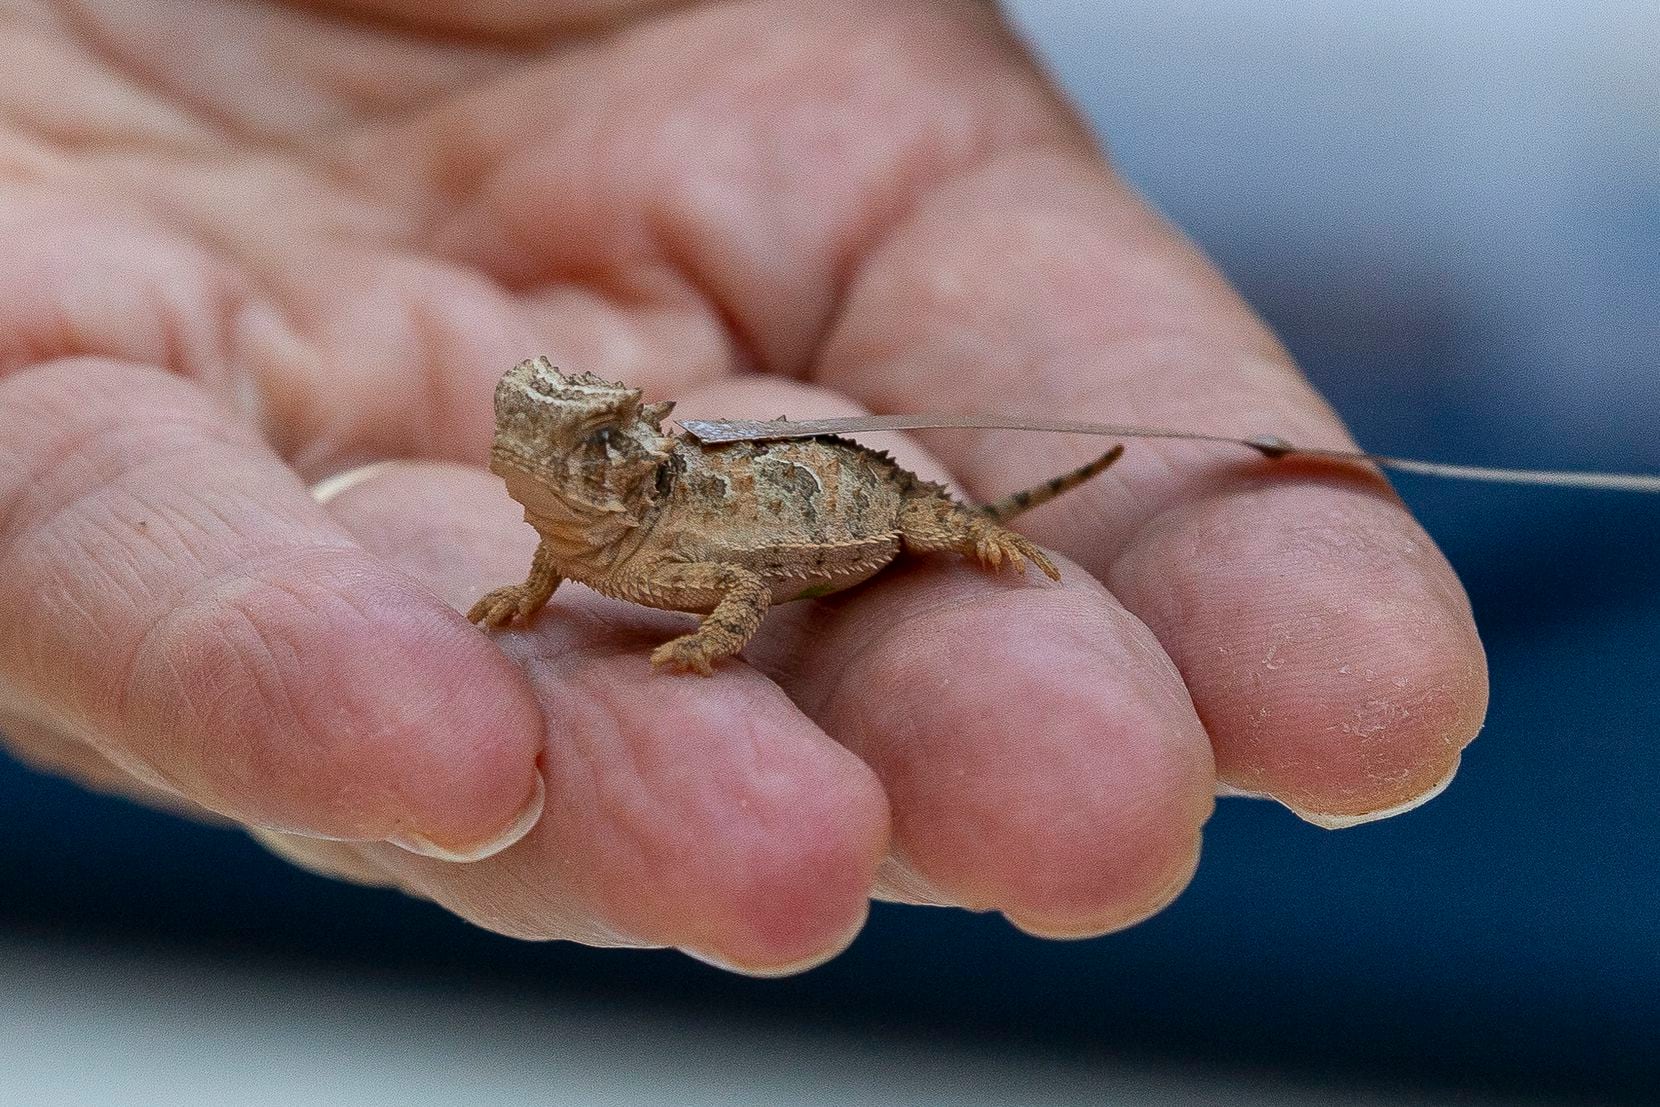 A Texas horned lizard hatchling sported a harmonic radar tag at the Fort Worth Zoo in September. The tag, which is flexible and won’t get tangled in brush, allows researchers from Texas Christian University in Fort Worth to track the hatchlings after they are released into the wild. Horned lizards have been threatened in Texas since the 1970s.